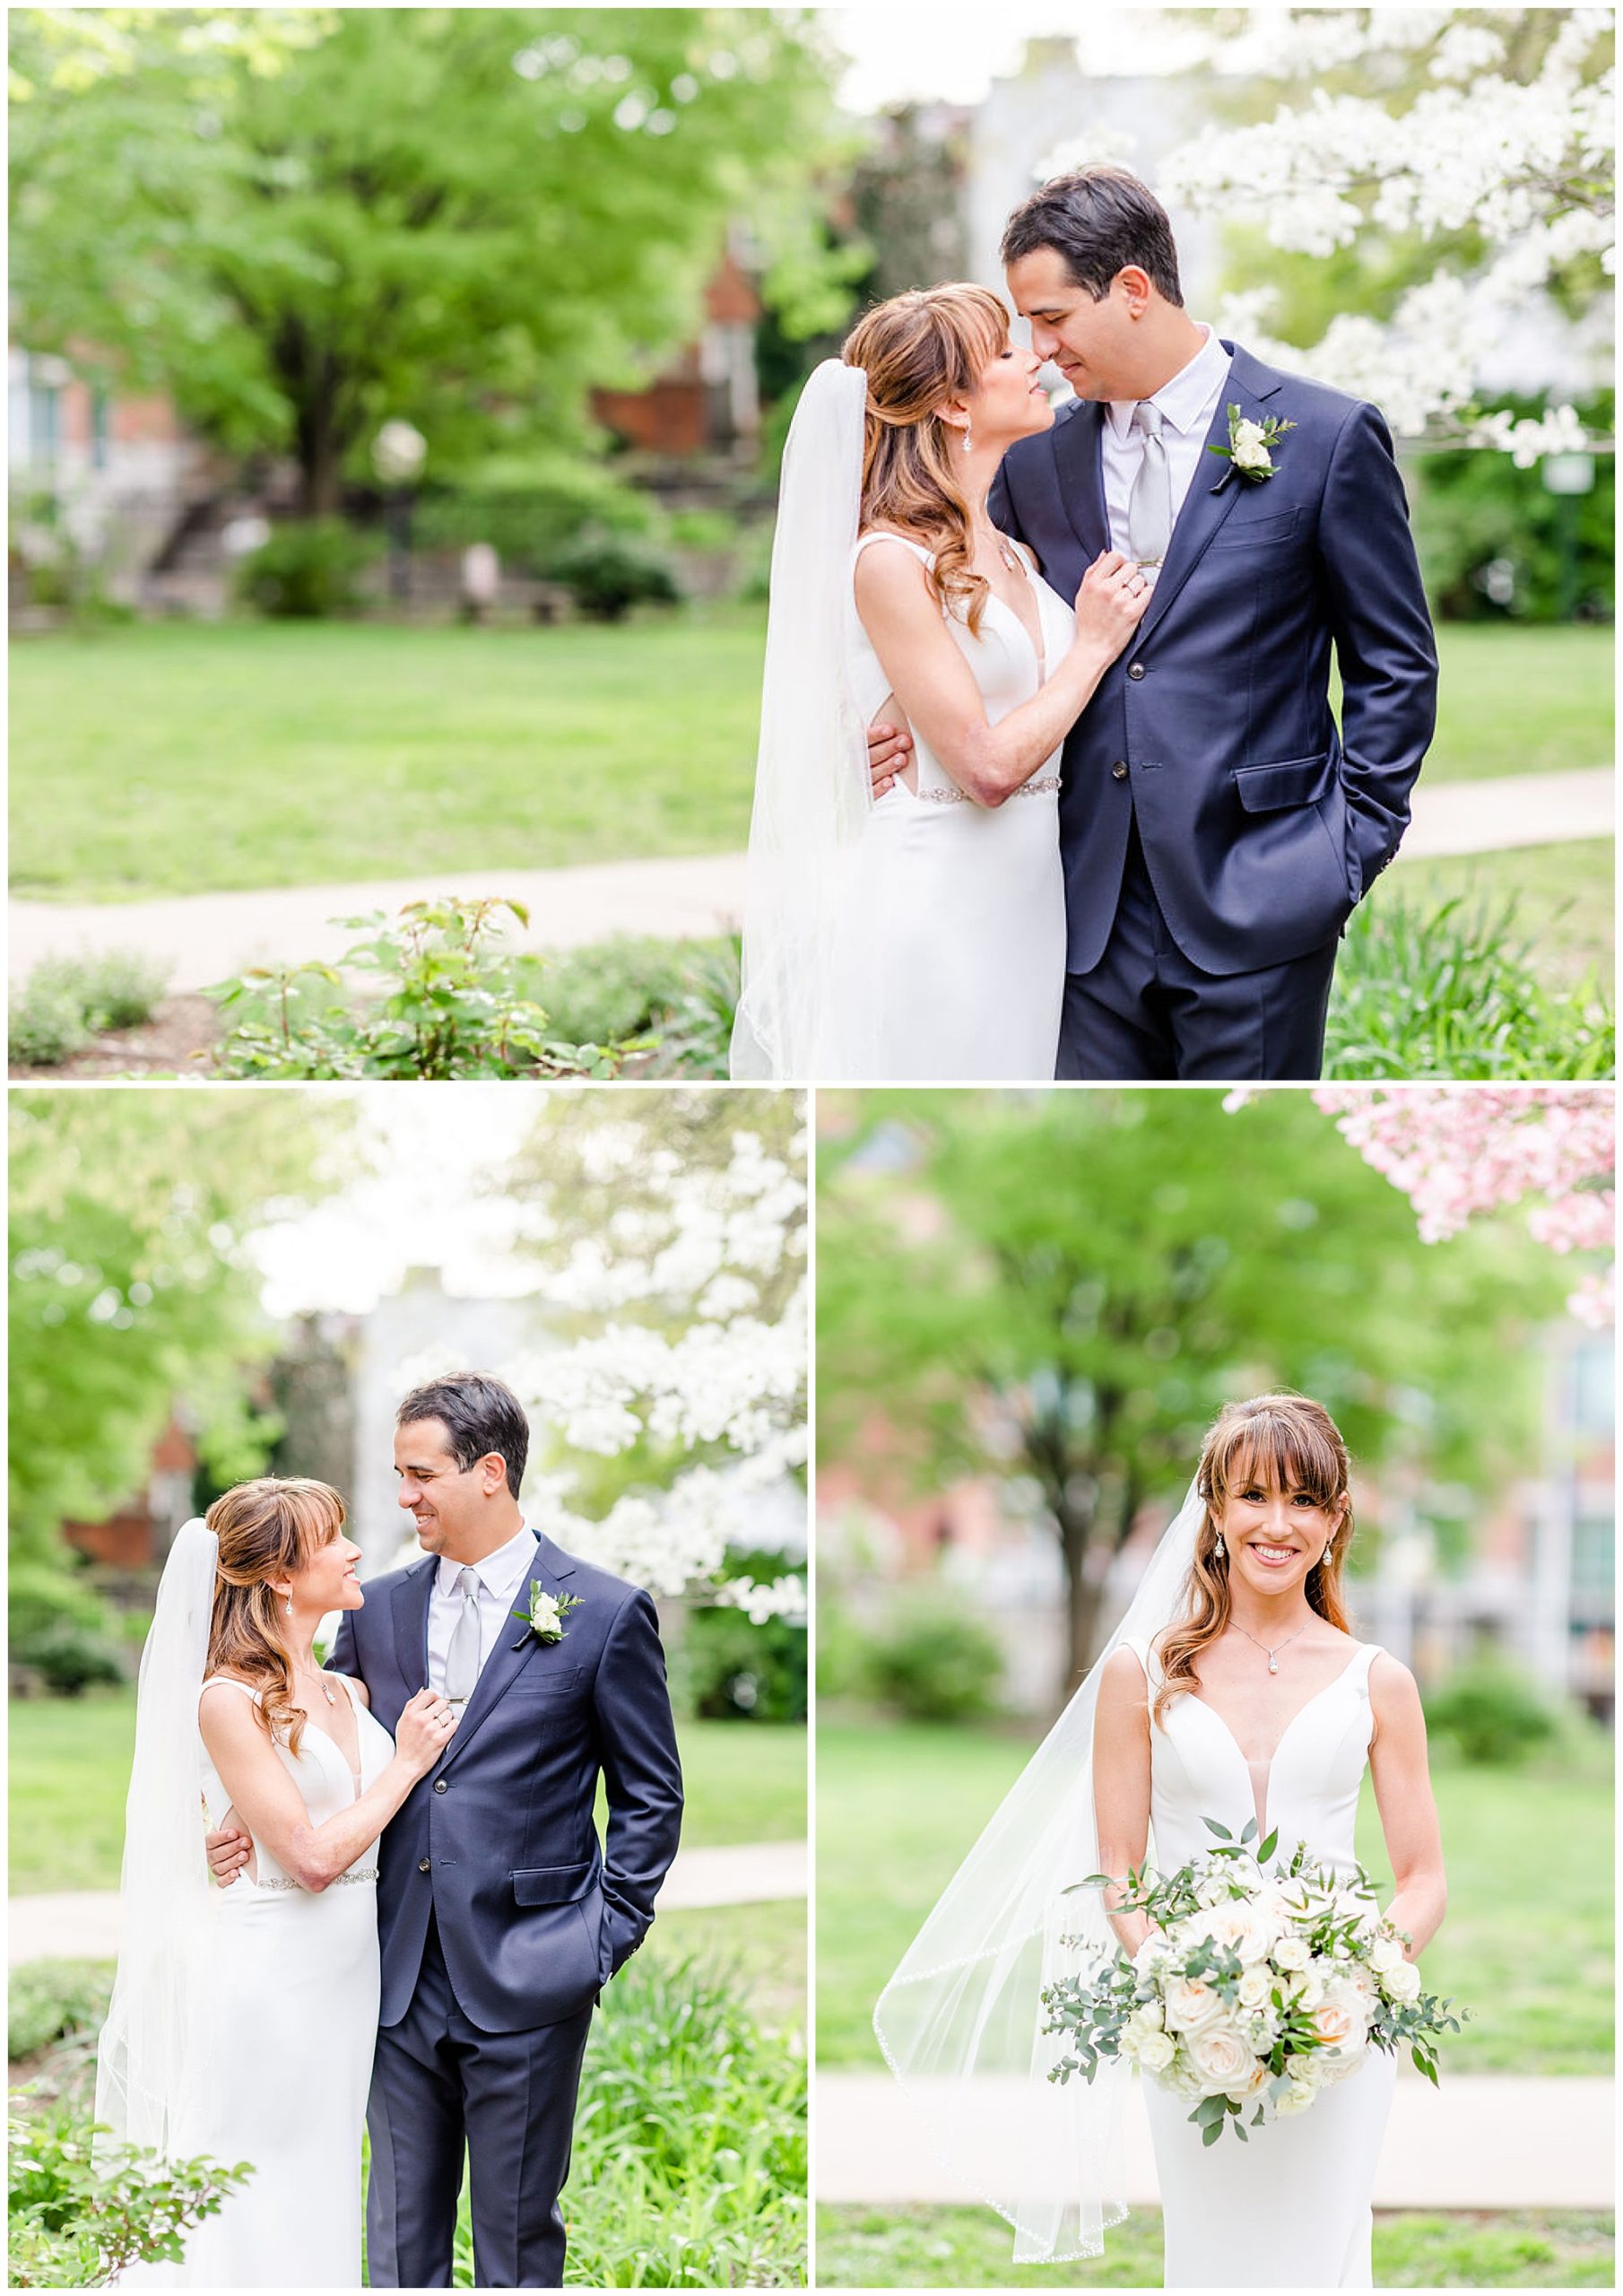 spring Ritz Carlton Georgetown wedding, Georgetown DC wedding, Georgetown Bride, Georgetown couple, DC couple, DC wedding venue, spring wedding, floral focused wedding, classic DC wedding, Ritz Carlton wedding, DC wedding photographer, Georgetown wedding photographer, Rachel E.H. Photography, bride smiling with bouquet, bride and groom touching noses